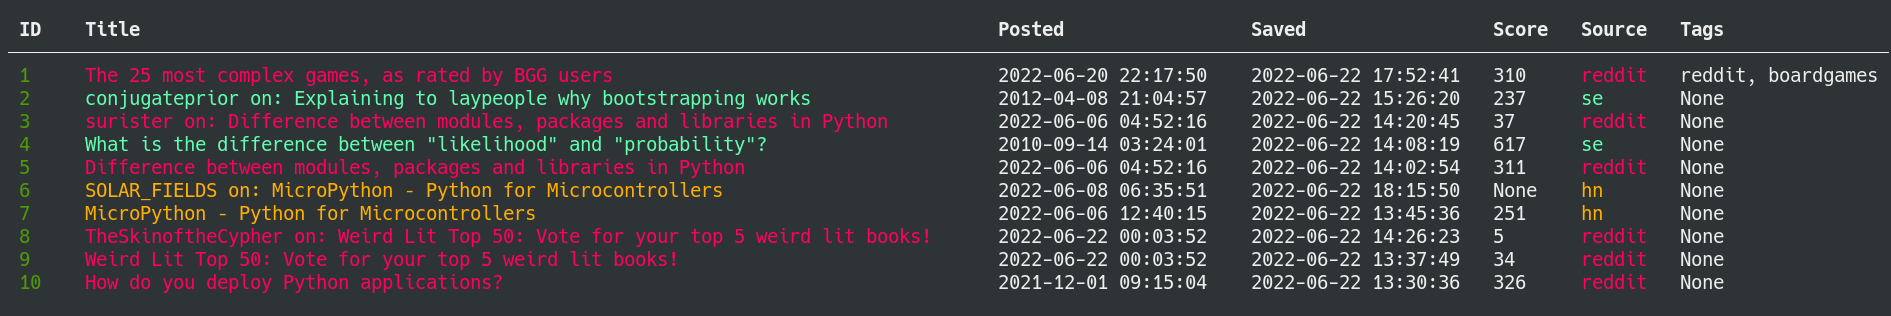 A table rendered in the terminal